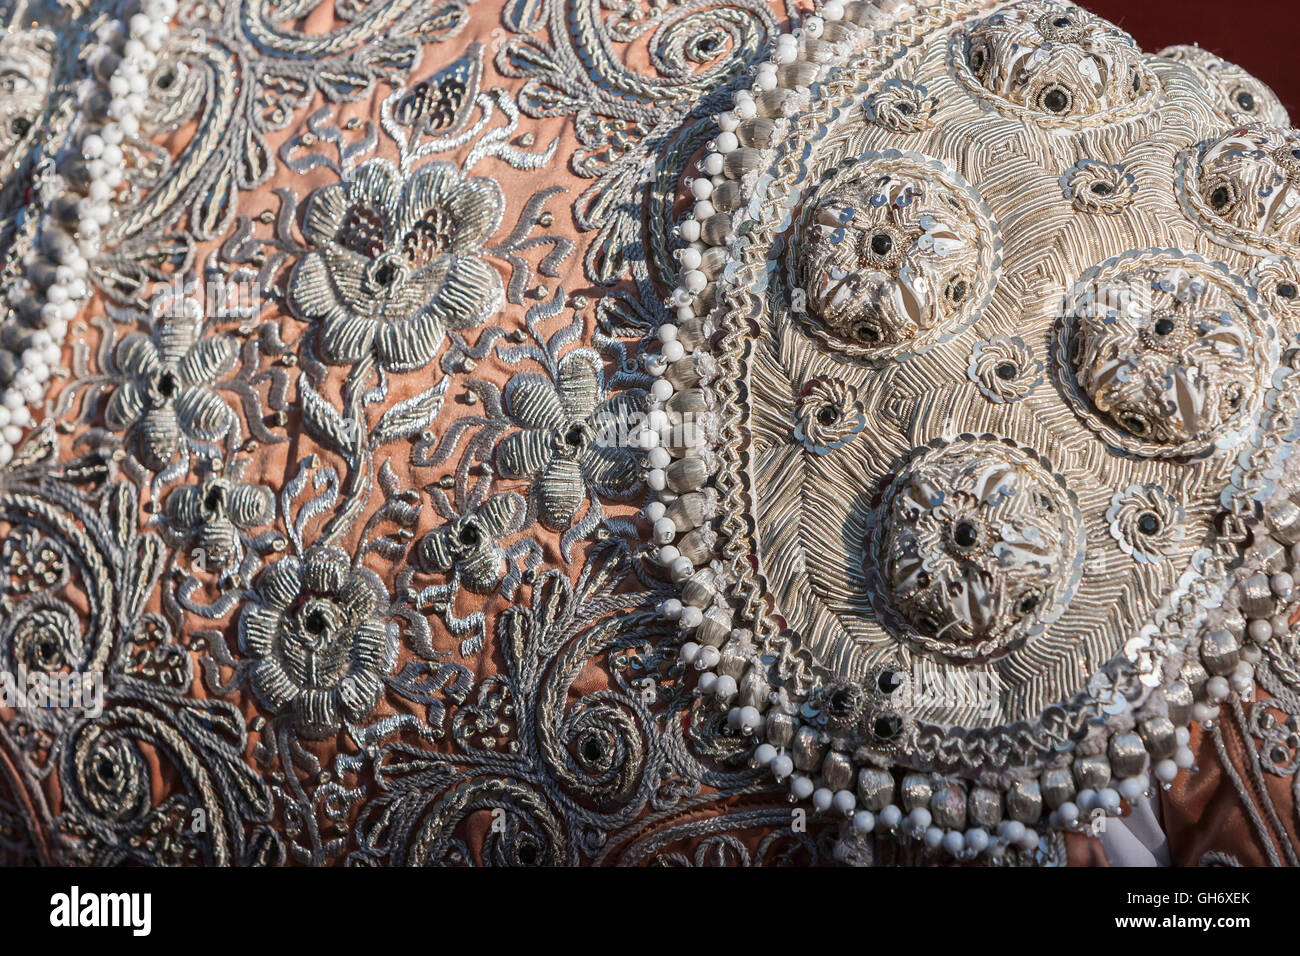 Detail of the 'traje de luces' or bullfighter dress, Spain Stock Photo